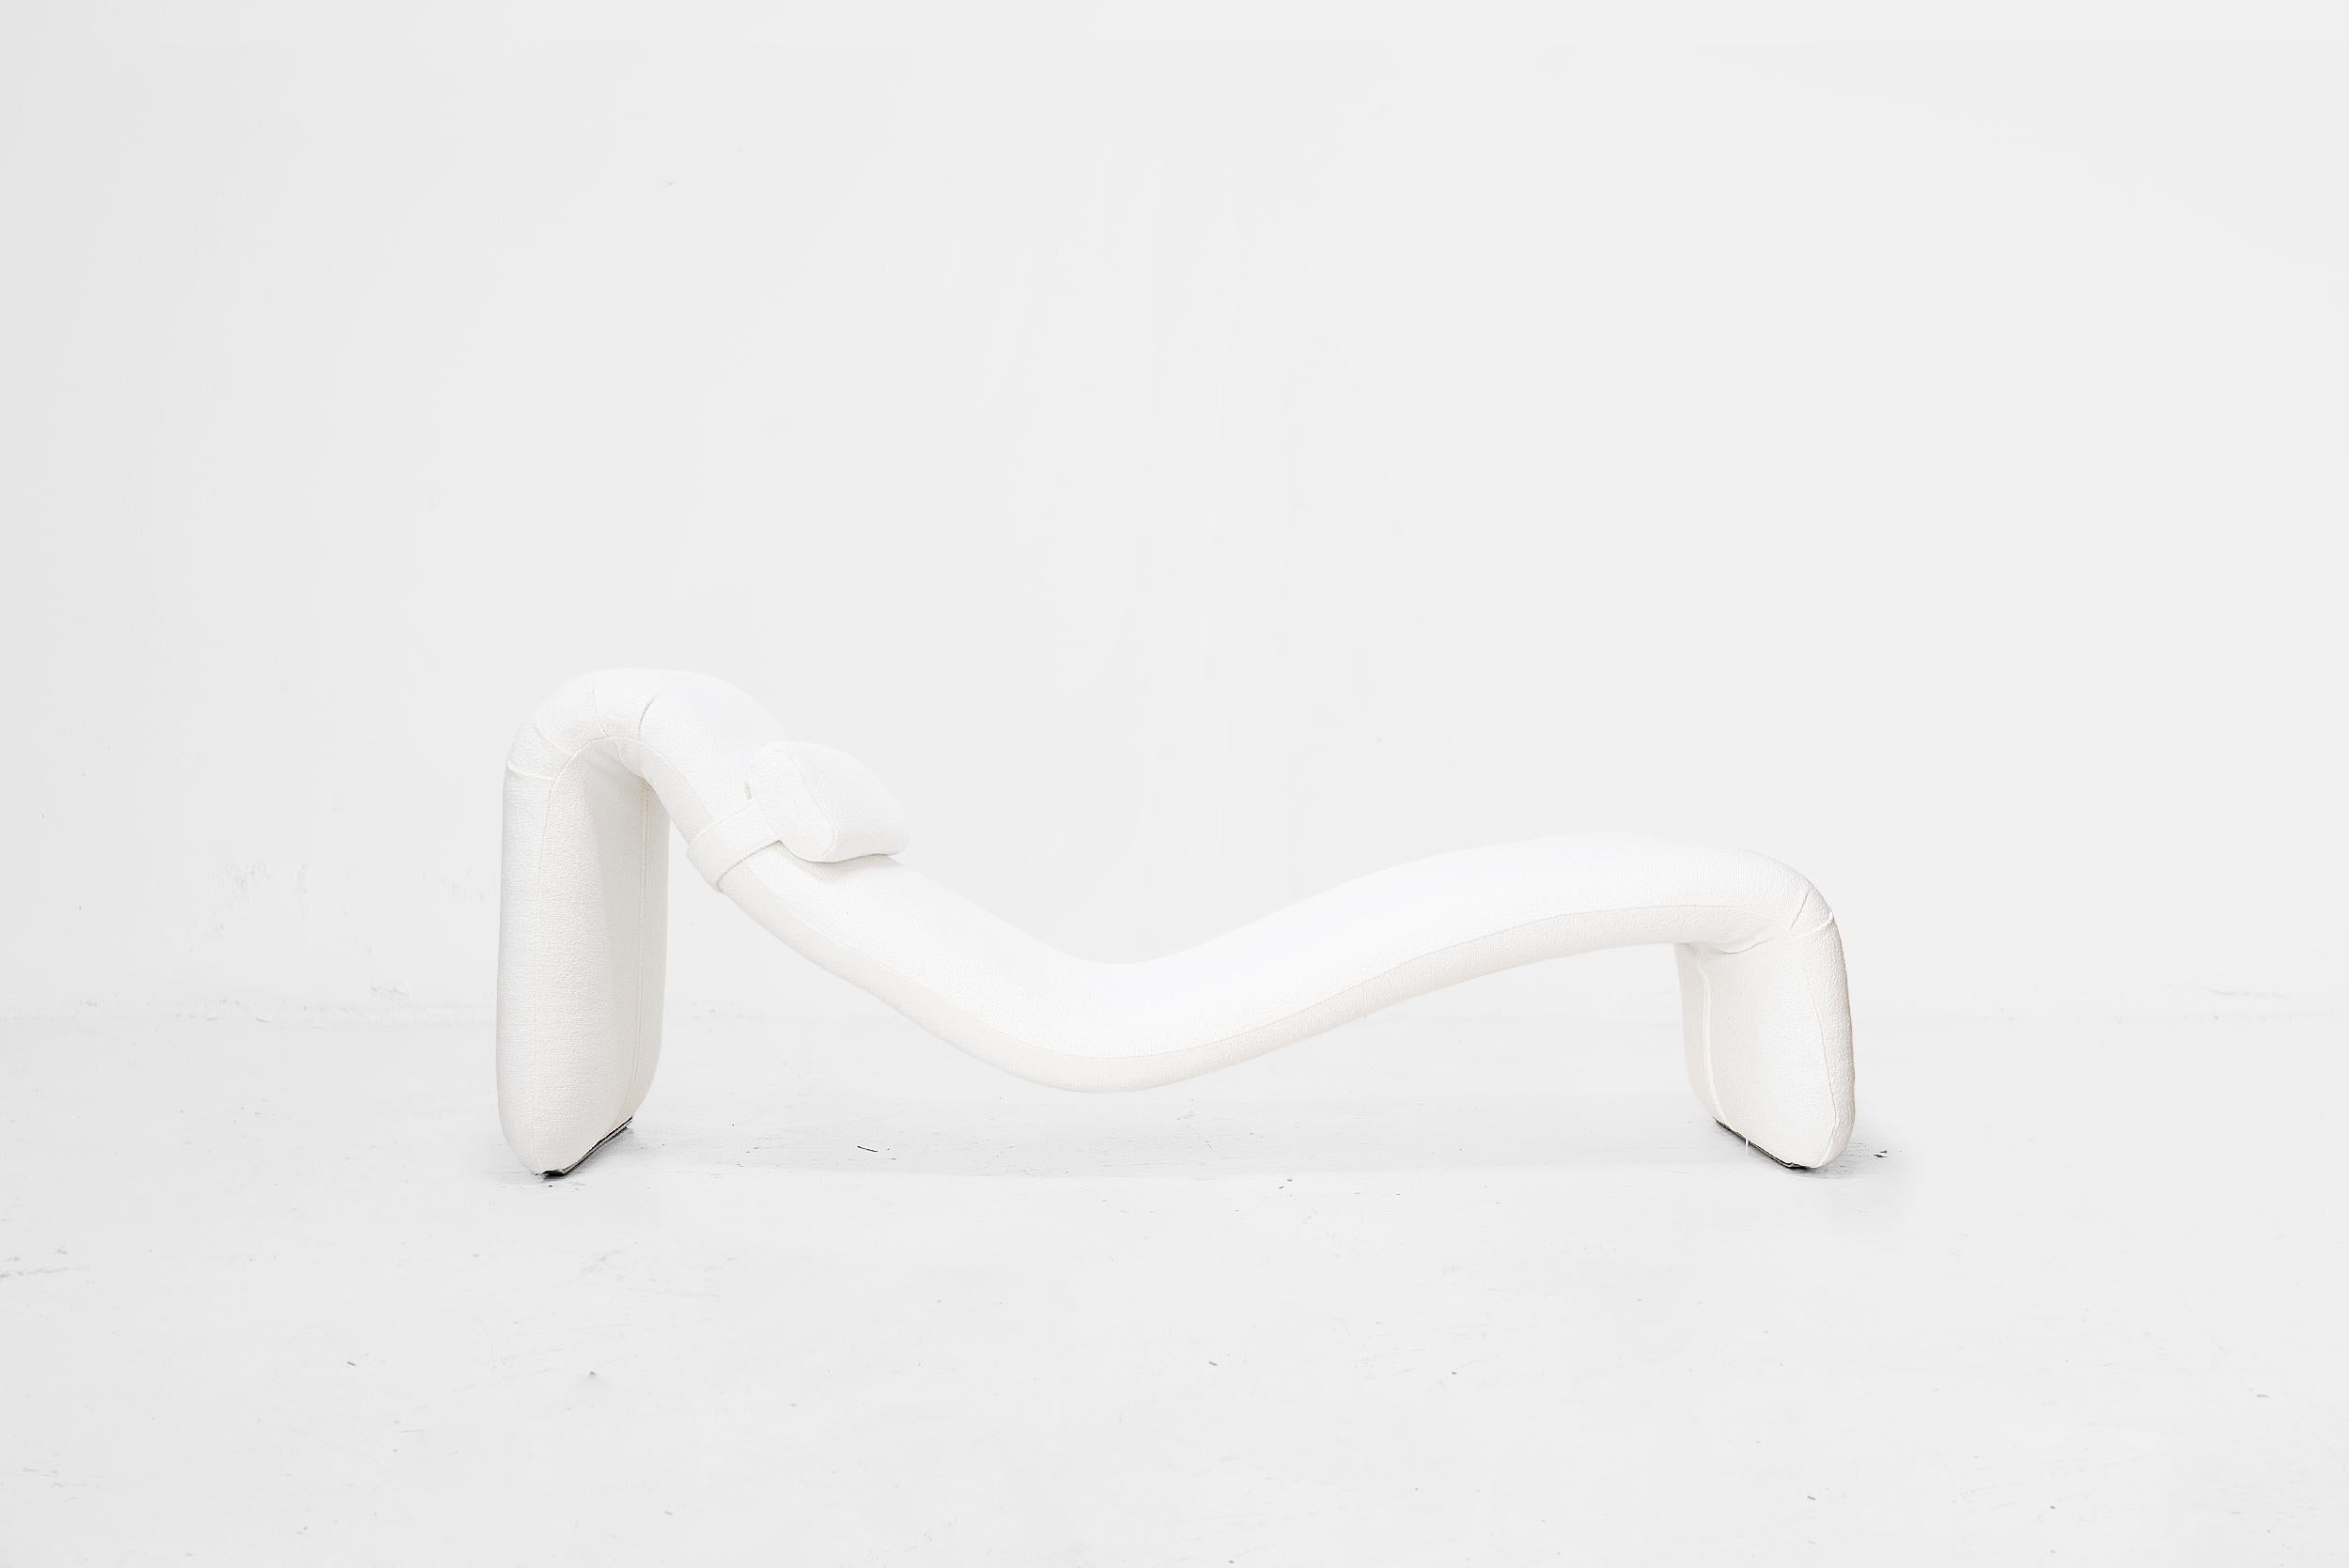 Olivier Mourgue (1939 – )

Chaise lounge model “Djinn”
Manufactured by Airborne International
France, 1960s
Metal, upholstery

Measurements
H 63 cm x W 175 cm x D 60 cm
H 24.81 in. x W 68.9 in. x D 23.63 in.

Provenance
Private